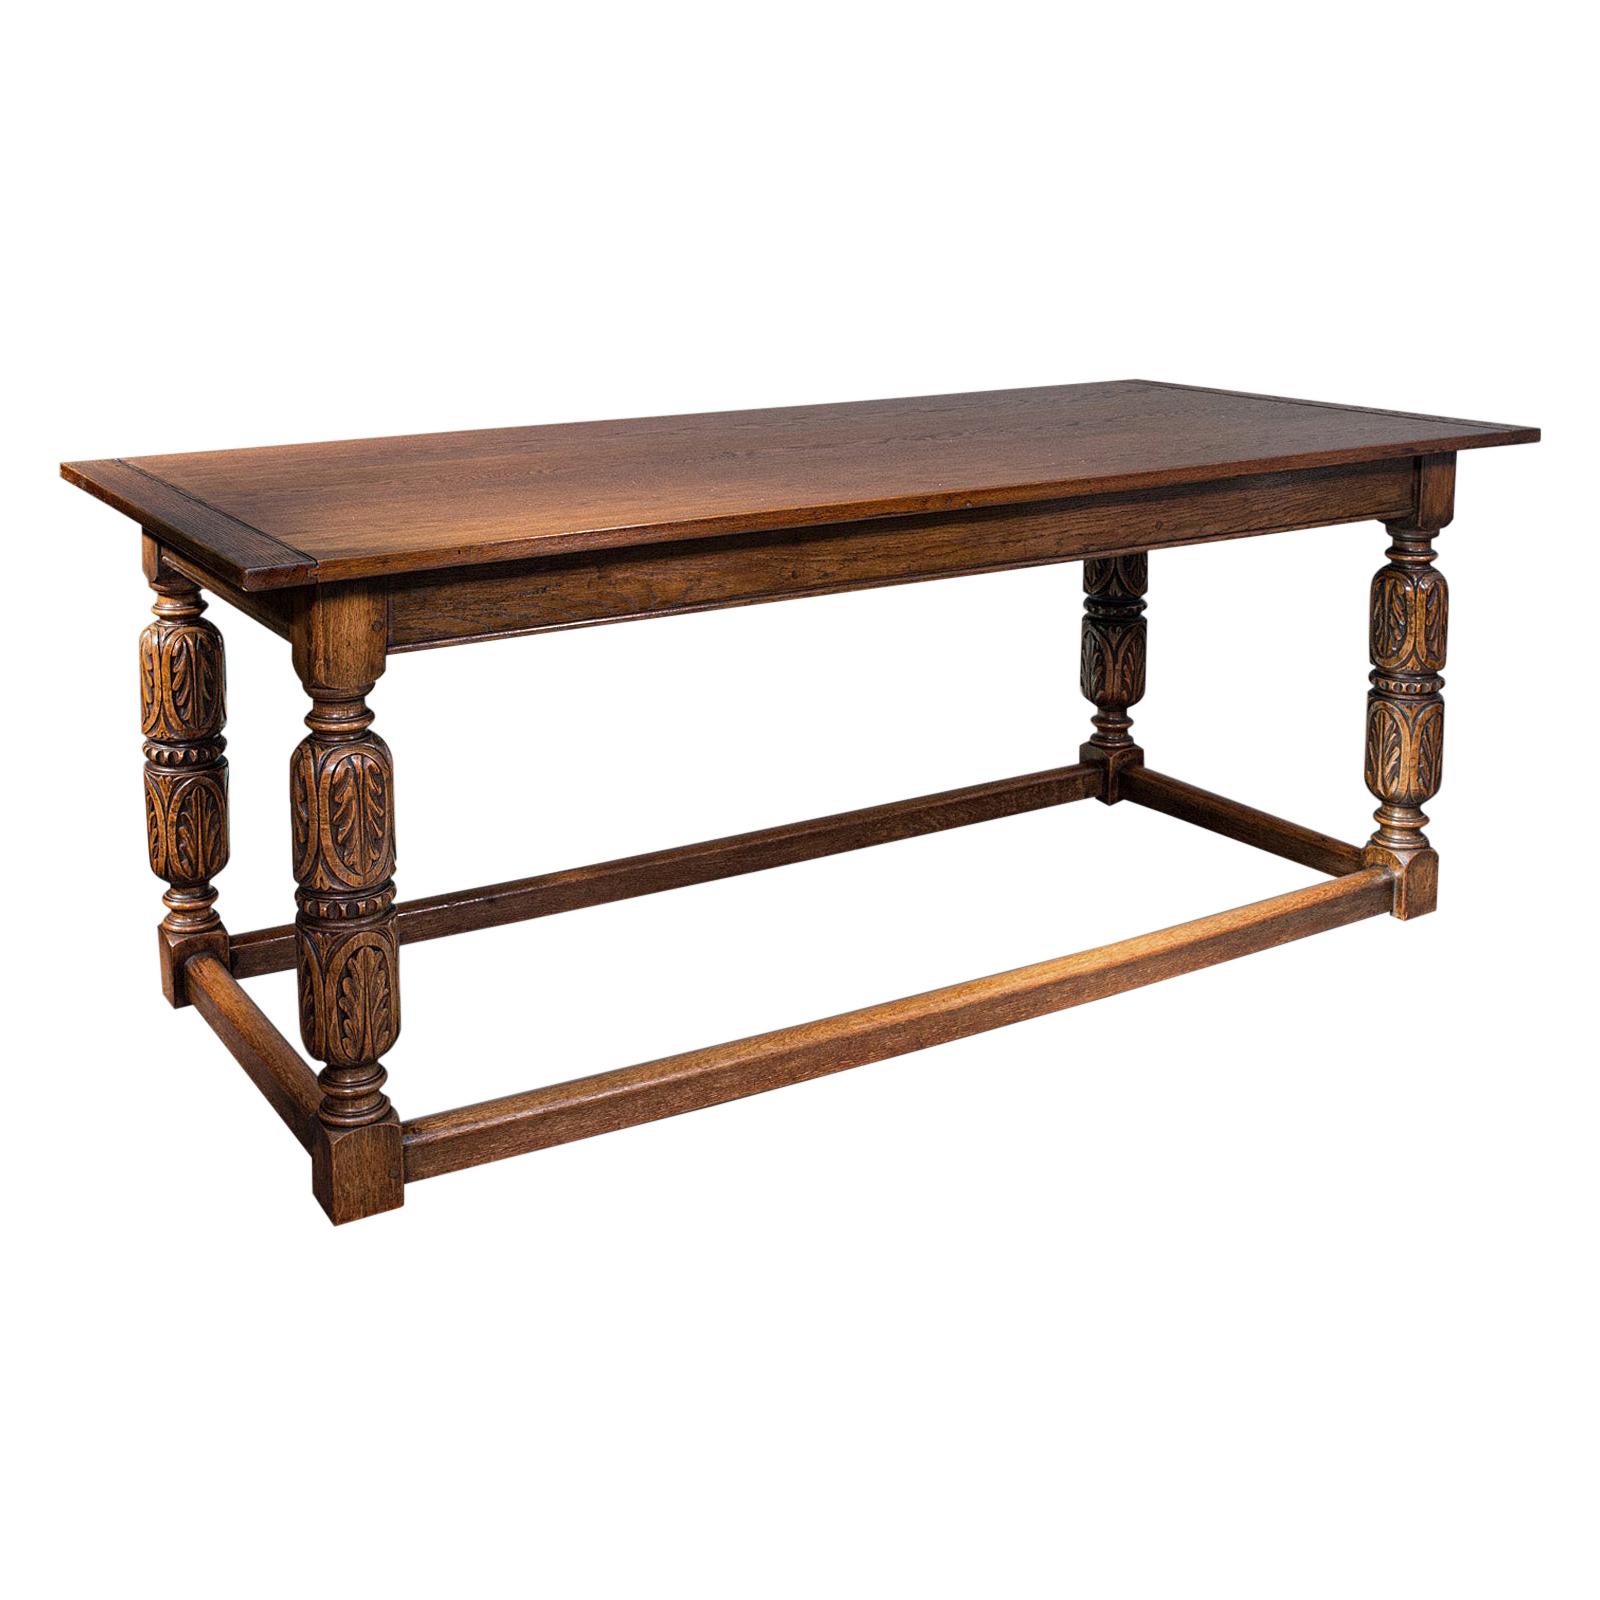 Antique Refectory Table, English, Oak, Dining, Jacobean Revival, Edwardian, 1910 For Sale